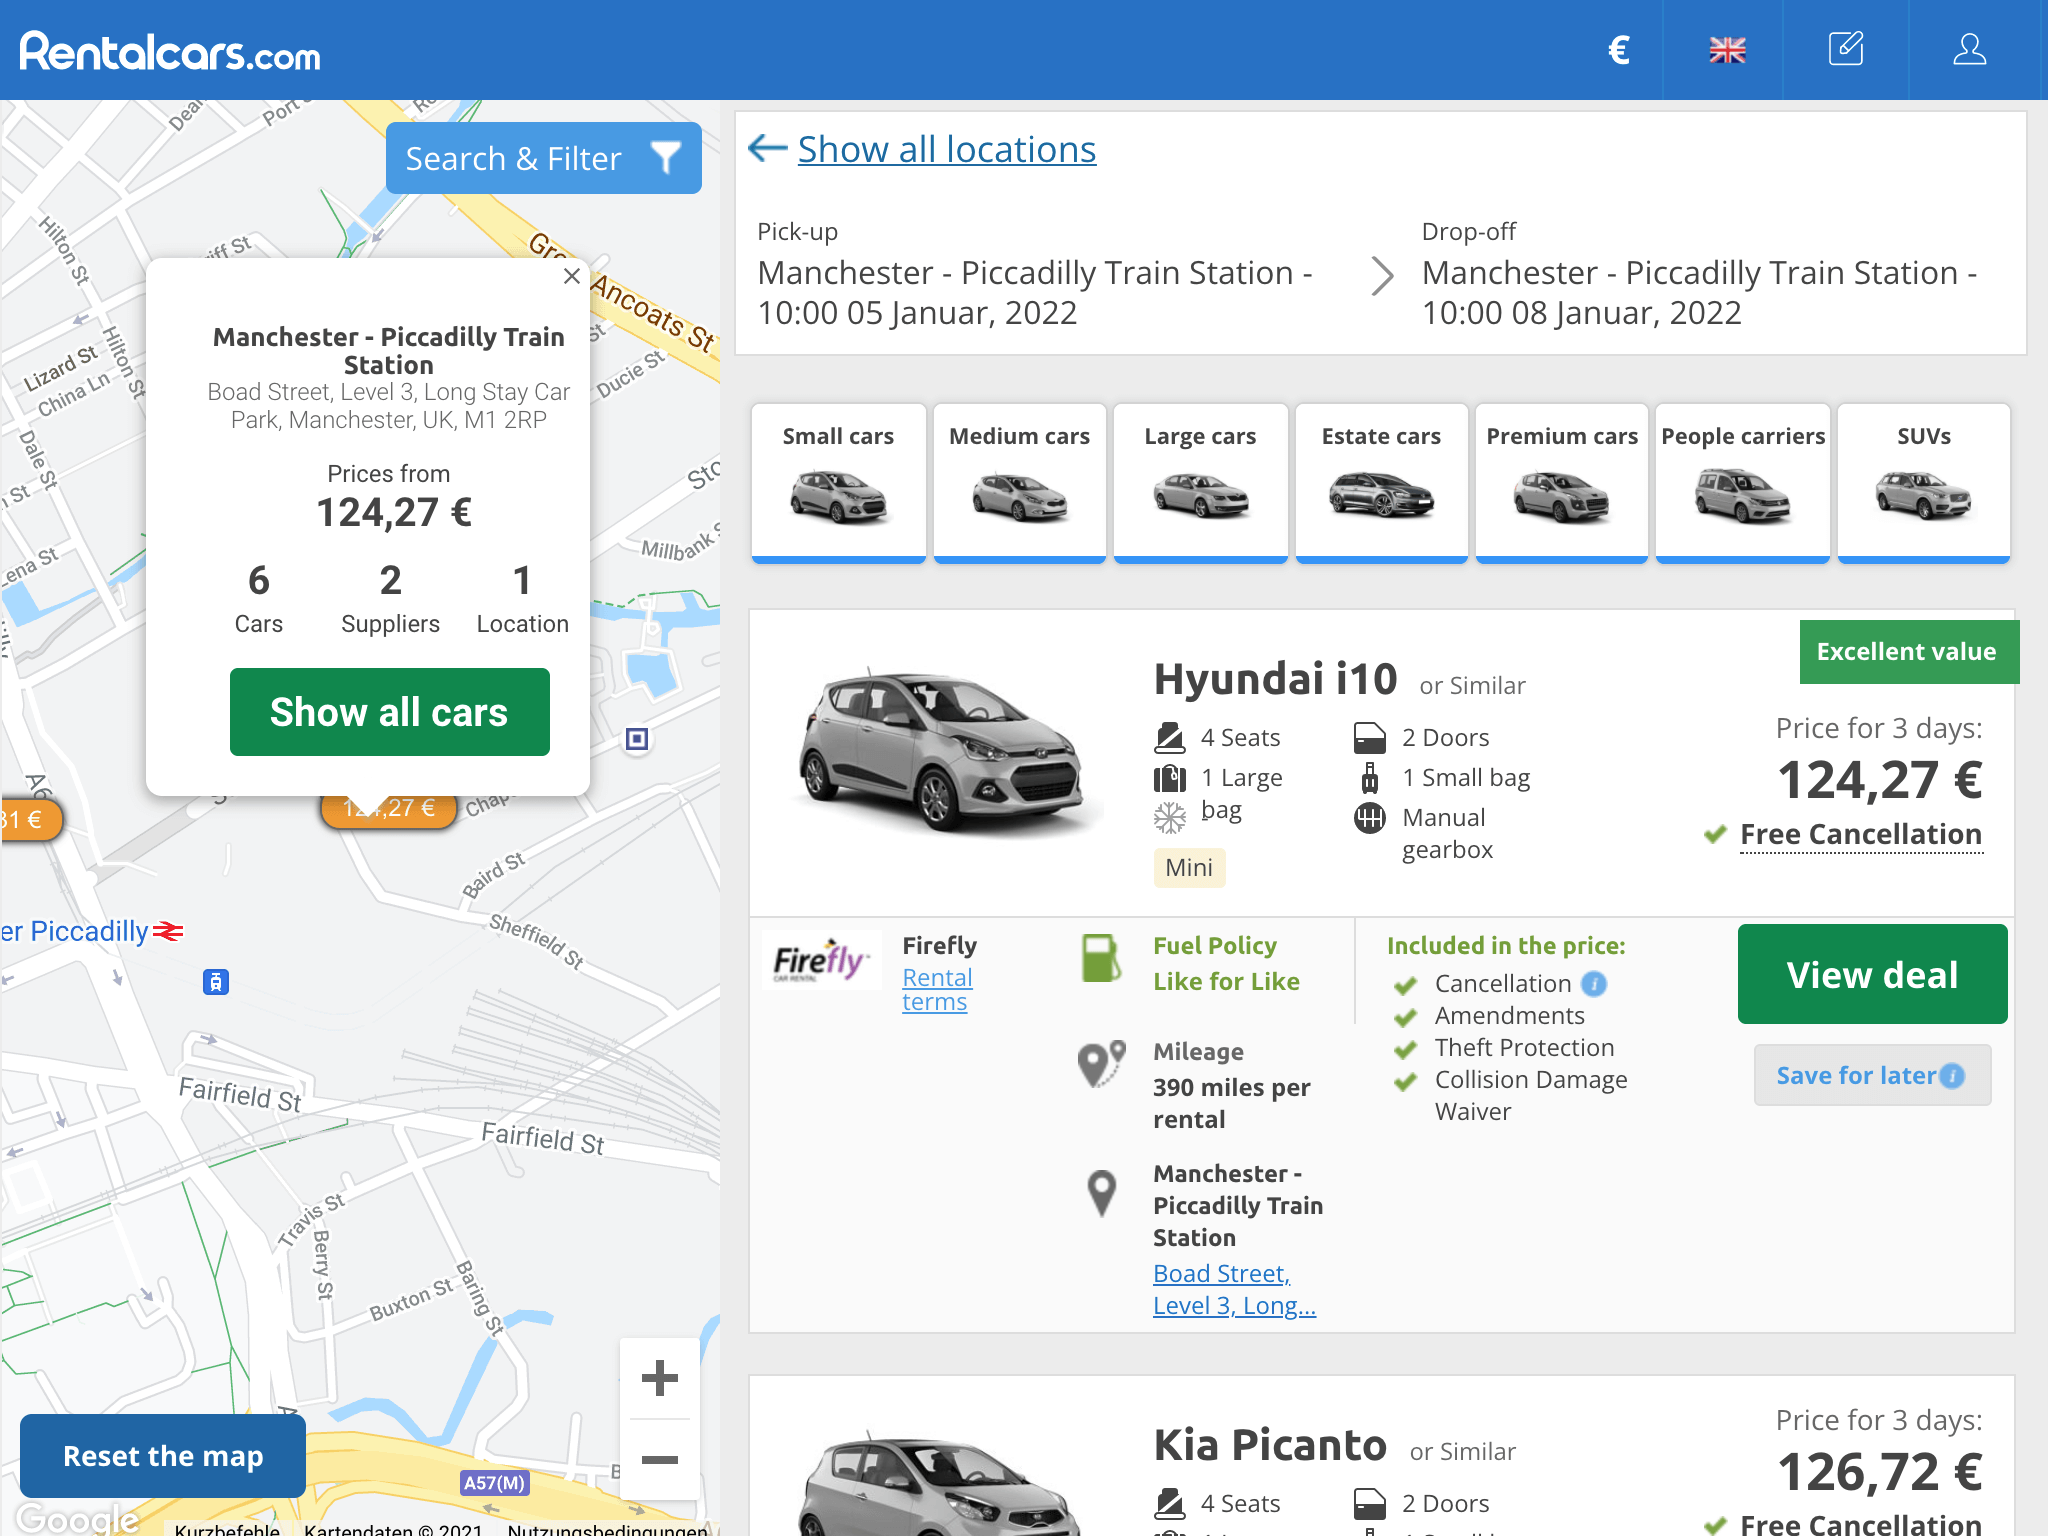 Car detail flow together with a map view